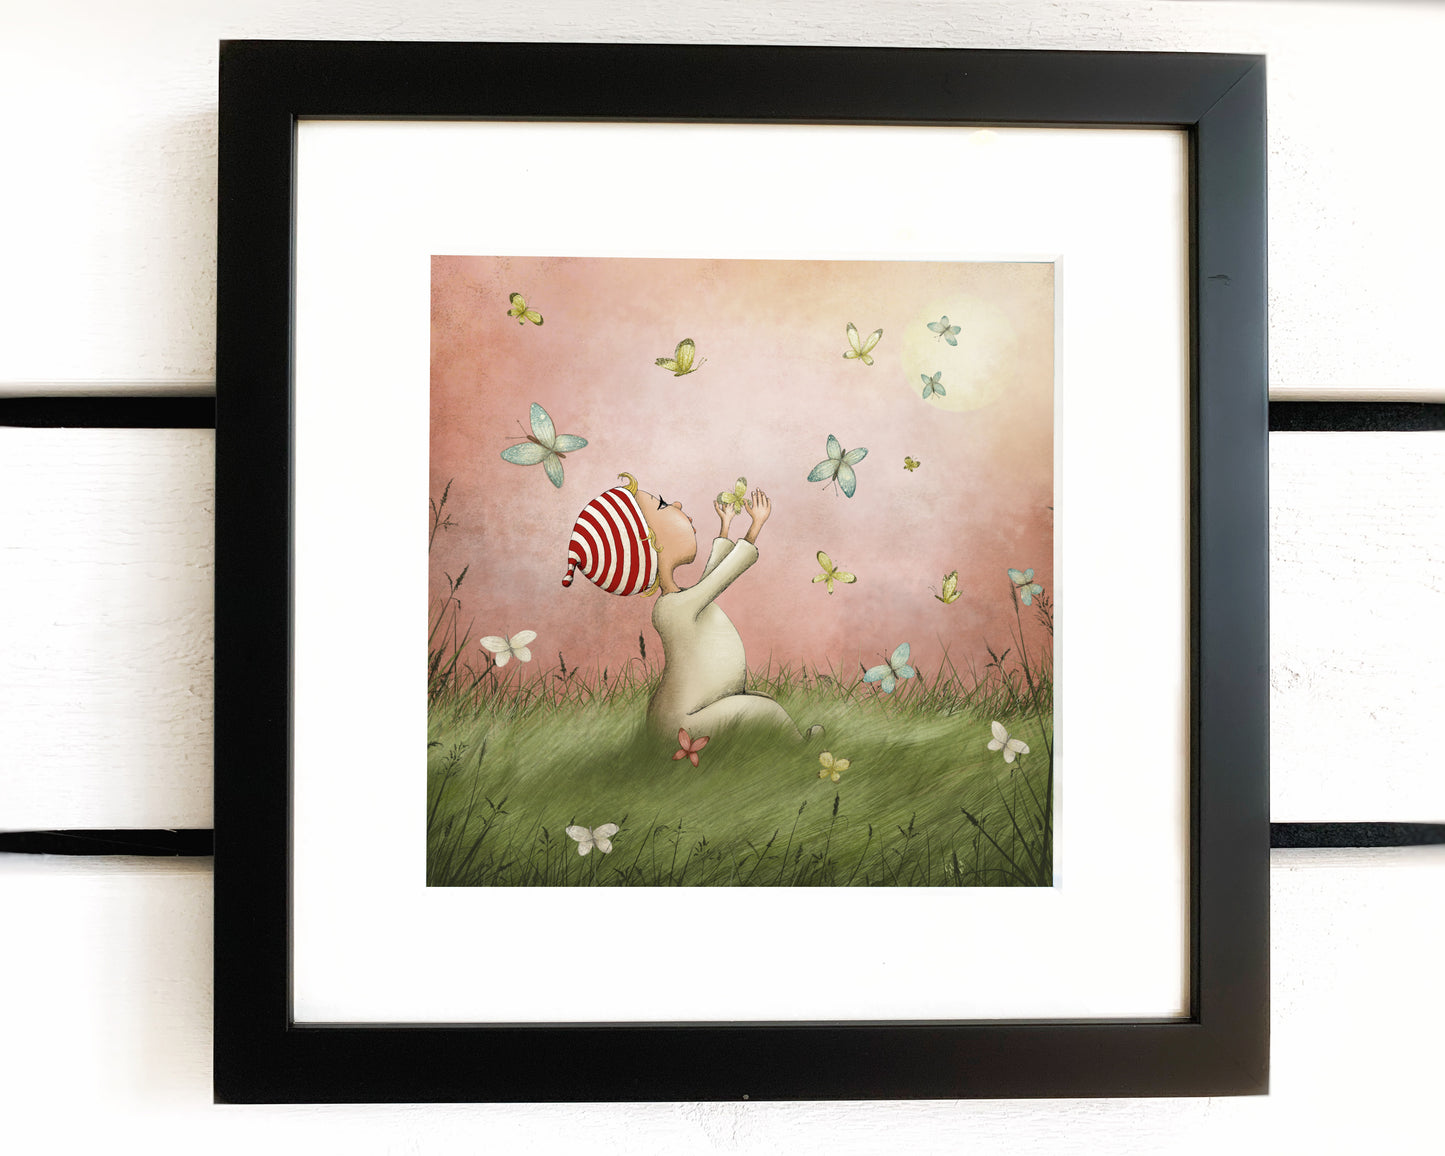 Playing with butterflies - Art print